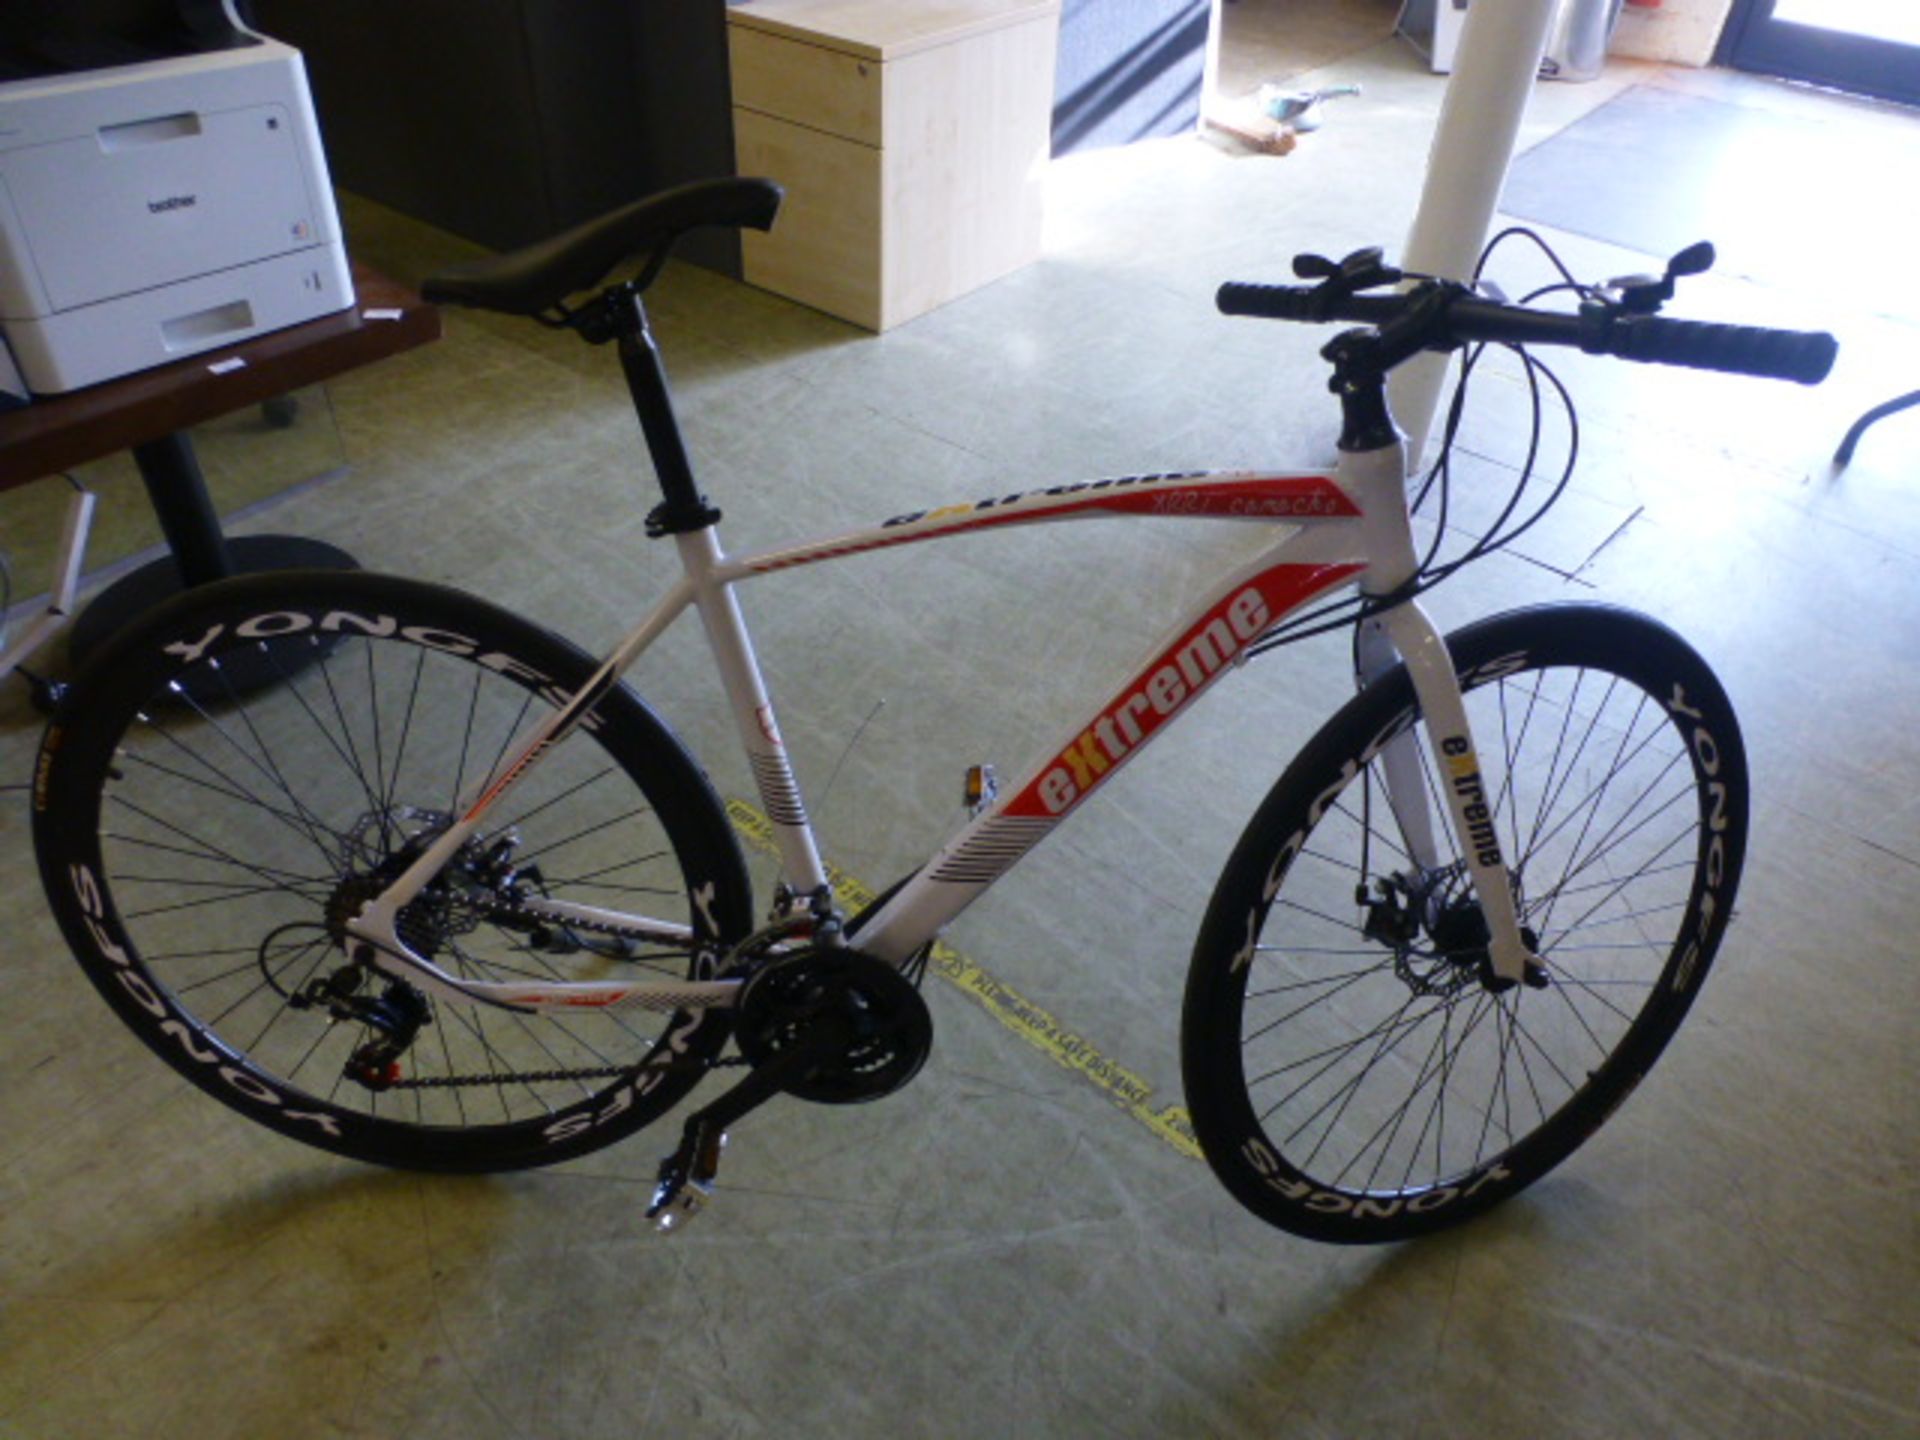 An unused Extreme XRRI Camacho bike in white CONDITION REPORT: Bike may required